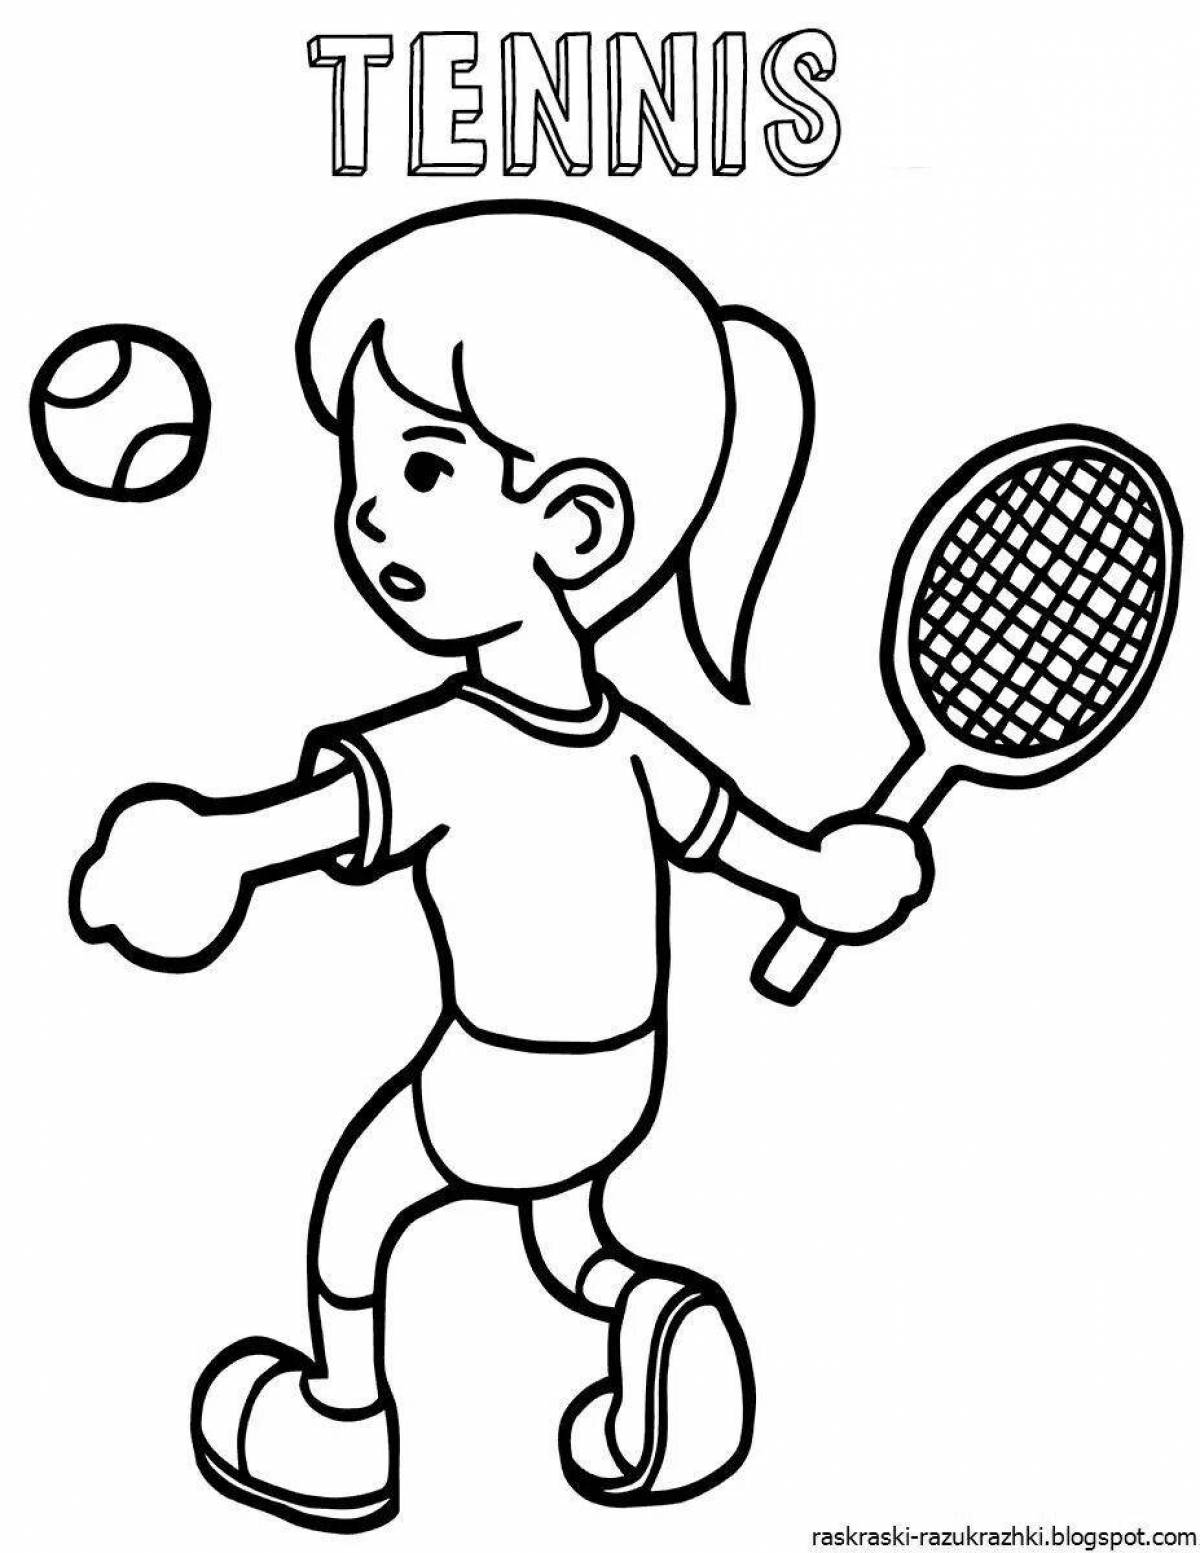 Fun coloring book sport and health for kids